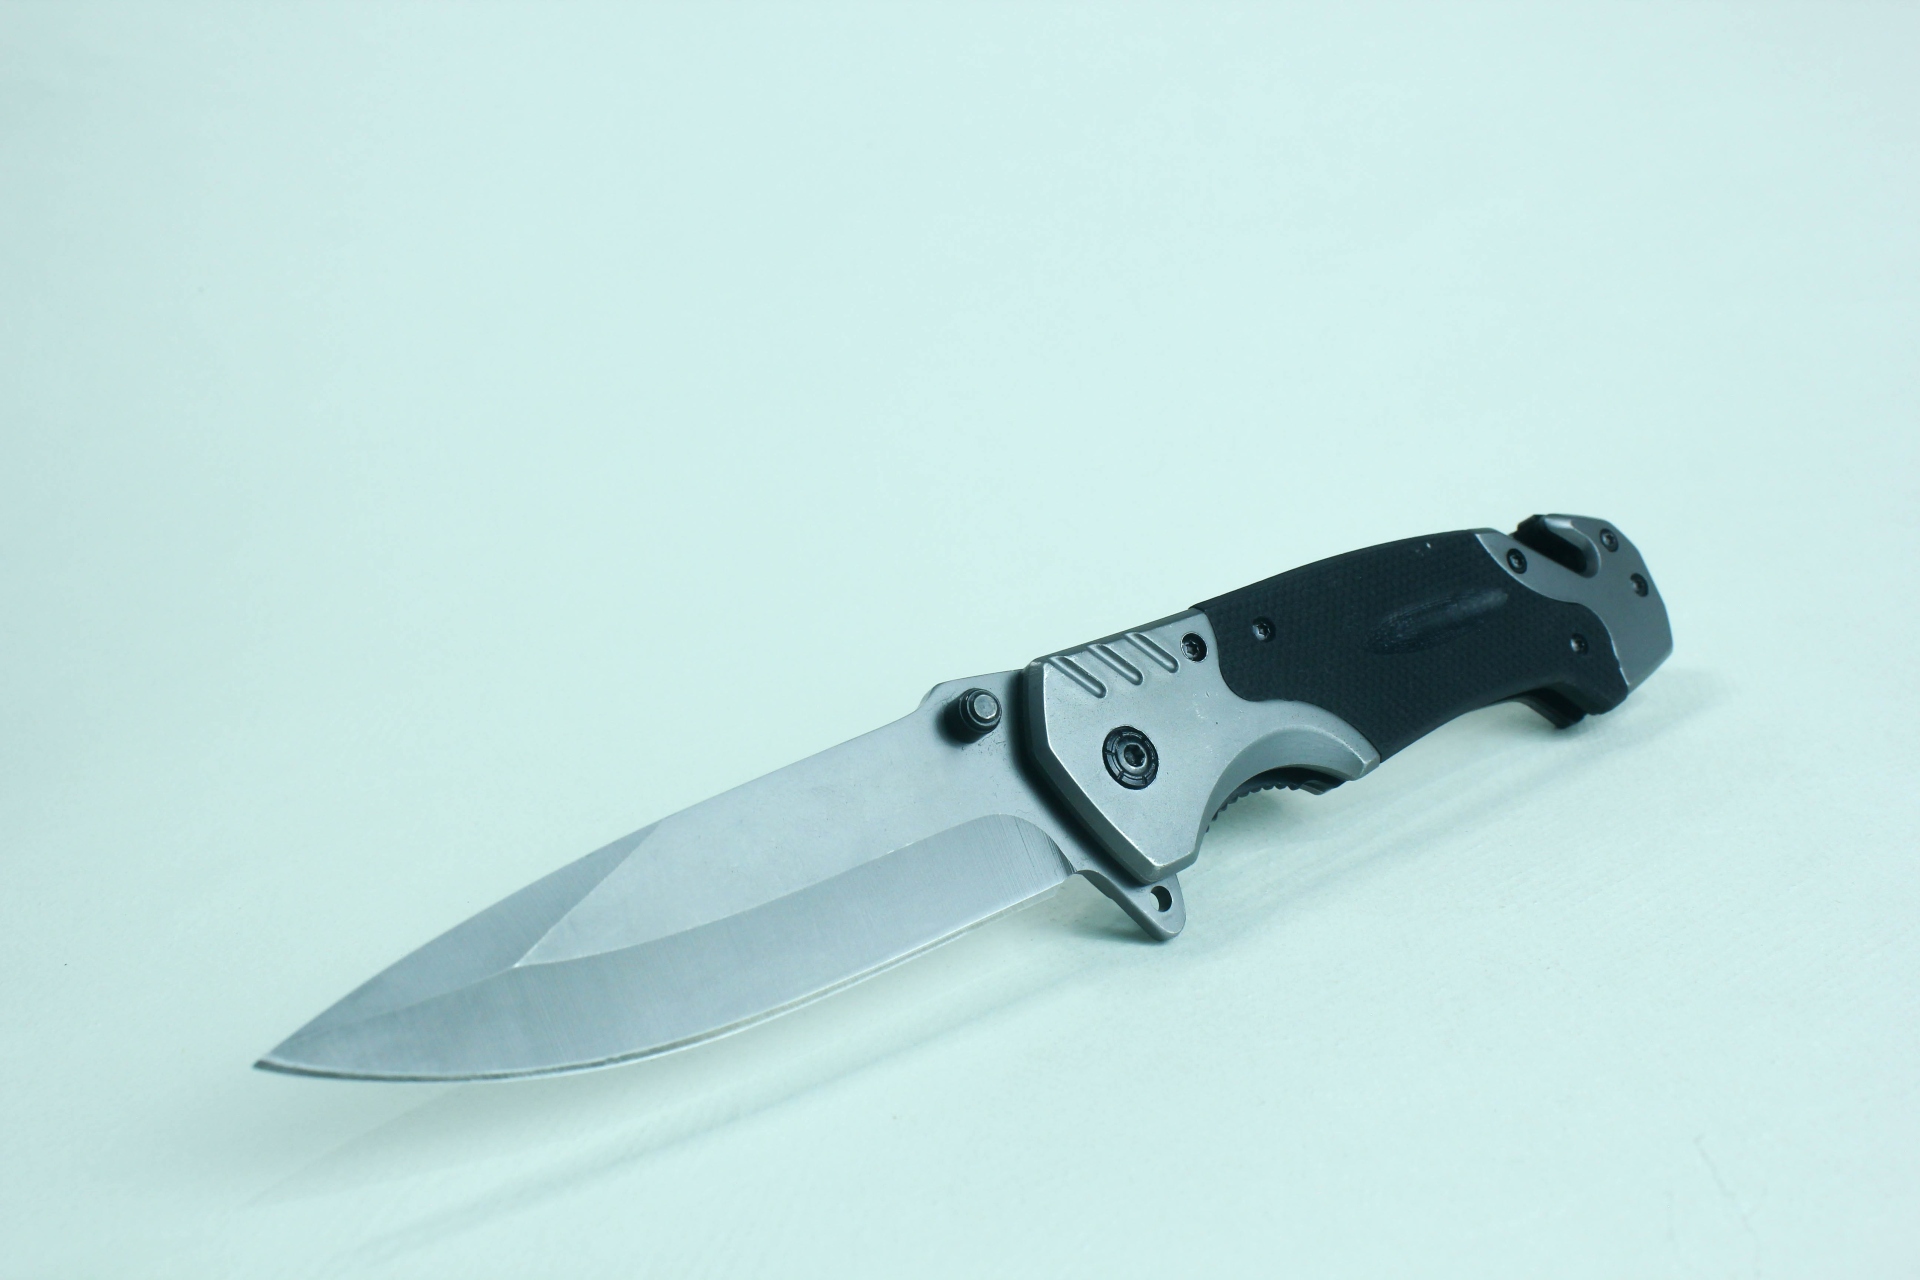 Advantages You Gain From Purchasing a Kershaw Knife From the Launch Line